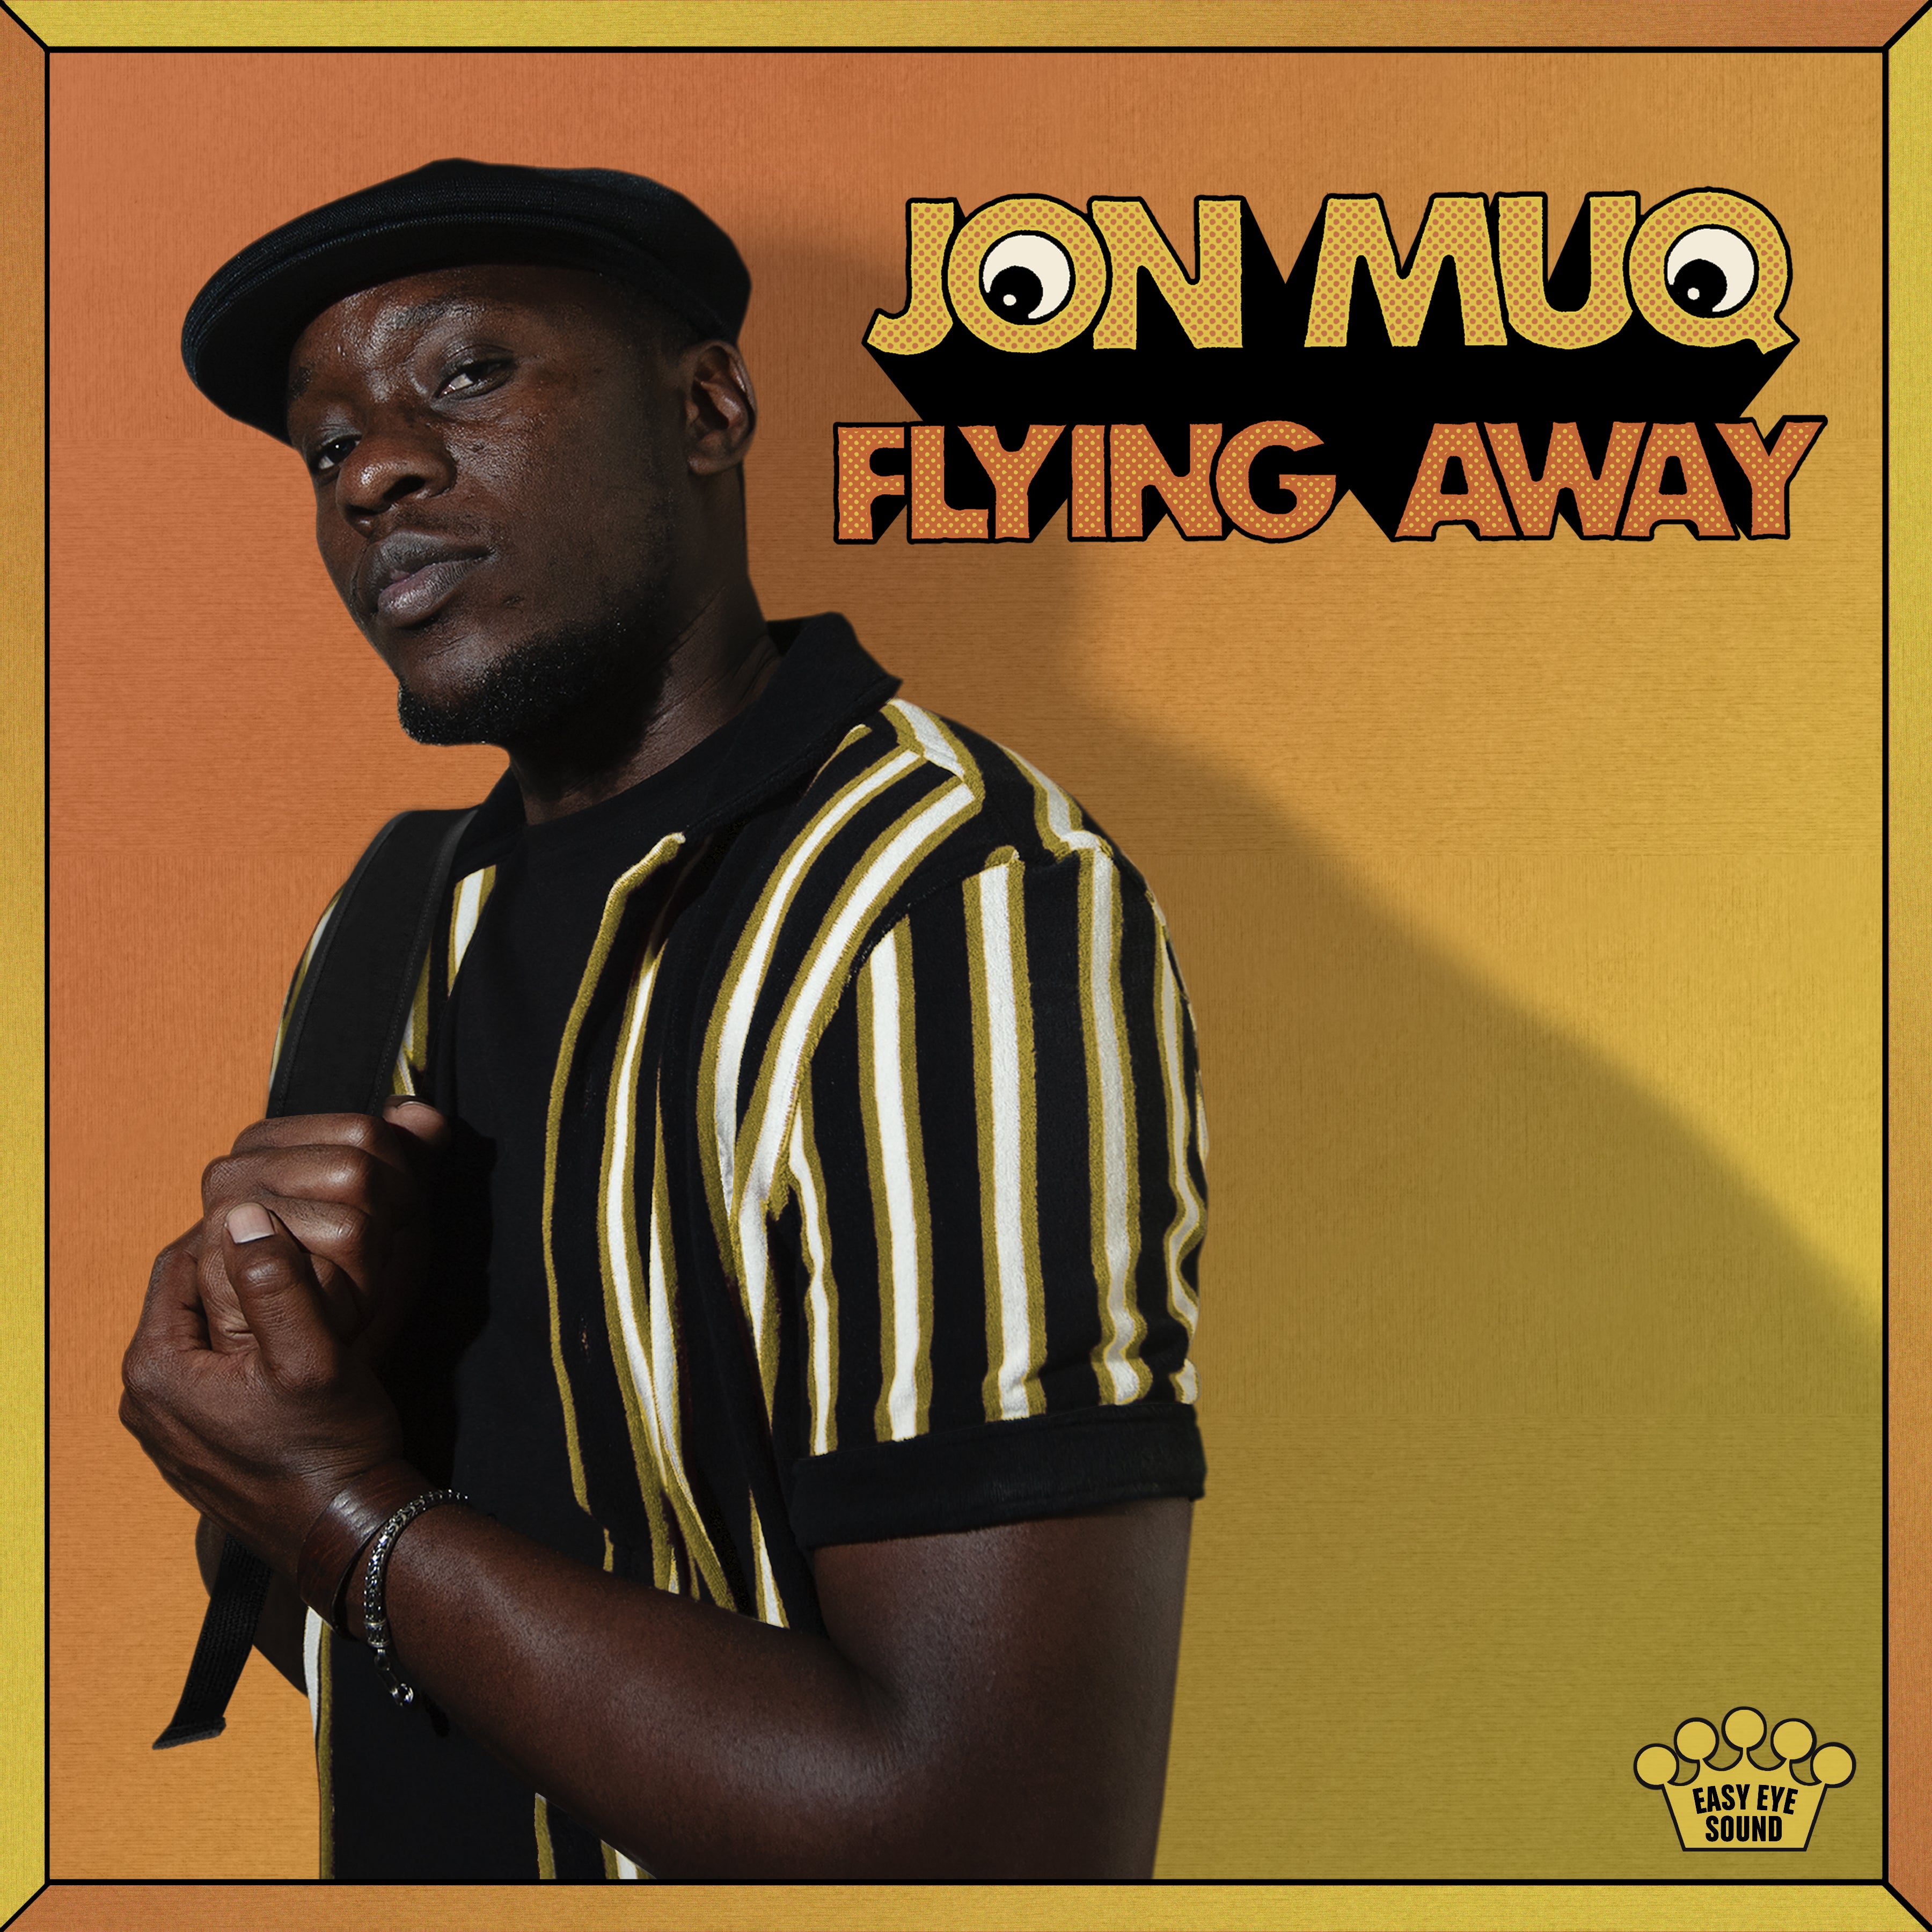 The powerful debut album 'Flying Away' by Jon Muq is available now!